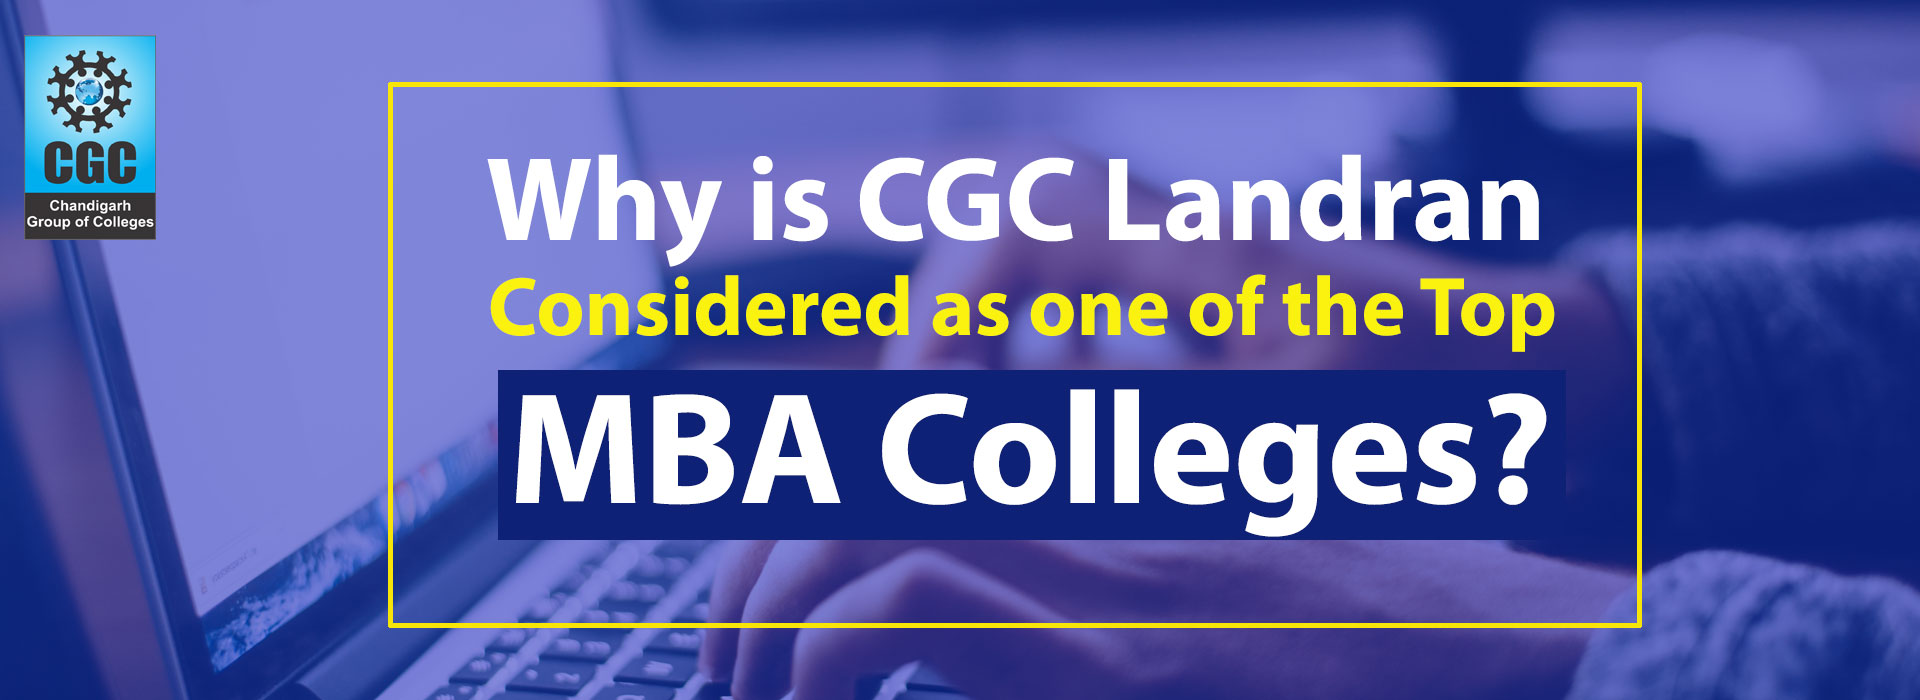 Why is CGC Landran considered as one of the Top MBA Colleges? 